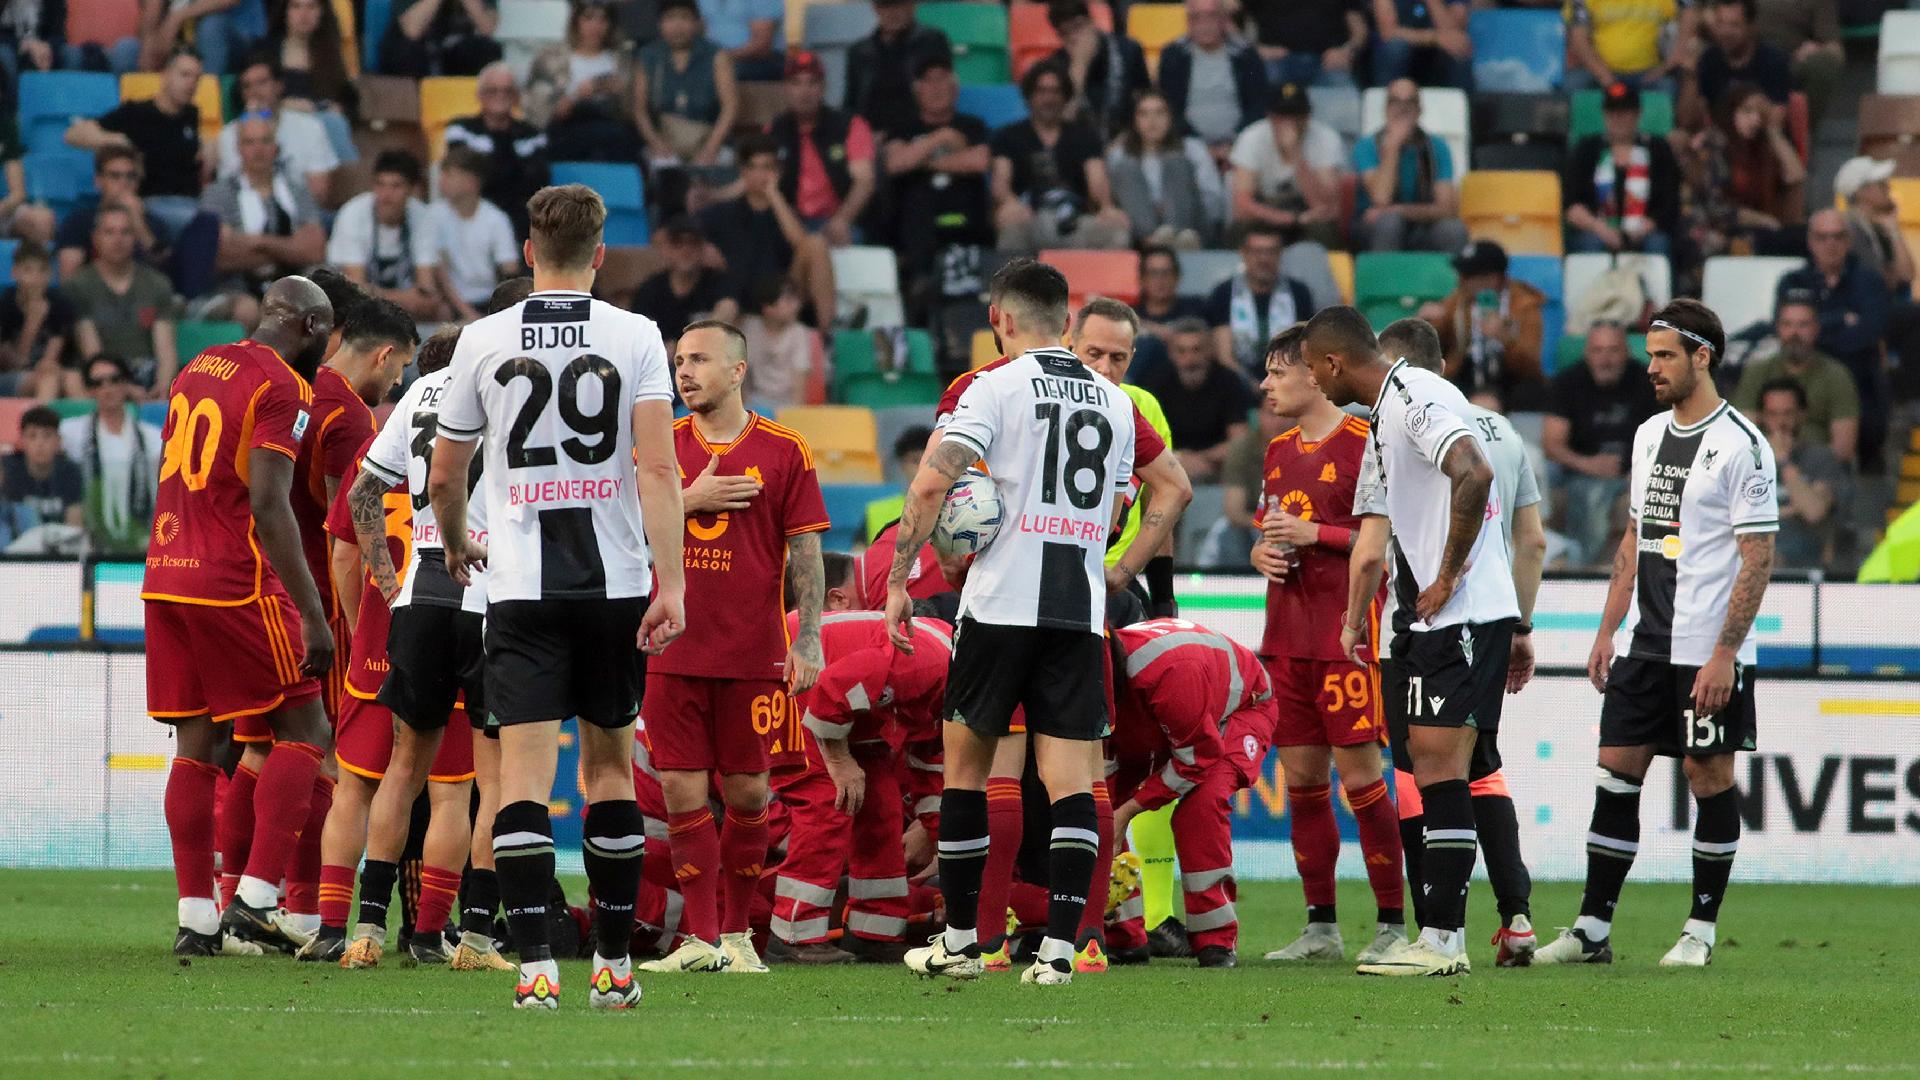 Roma match abandoned after Evan Ndicka collapses against Udinese